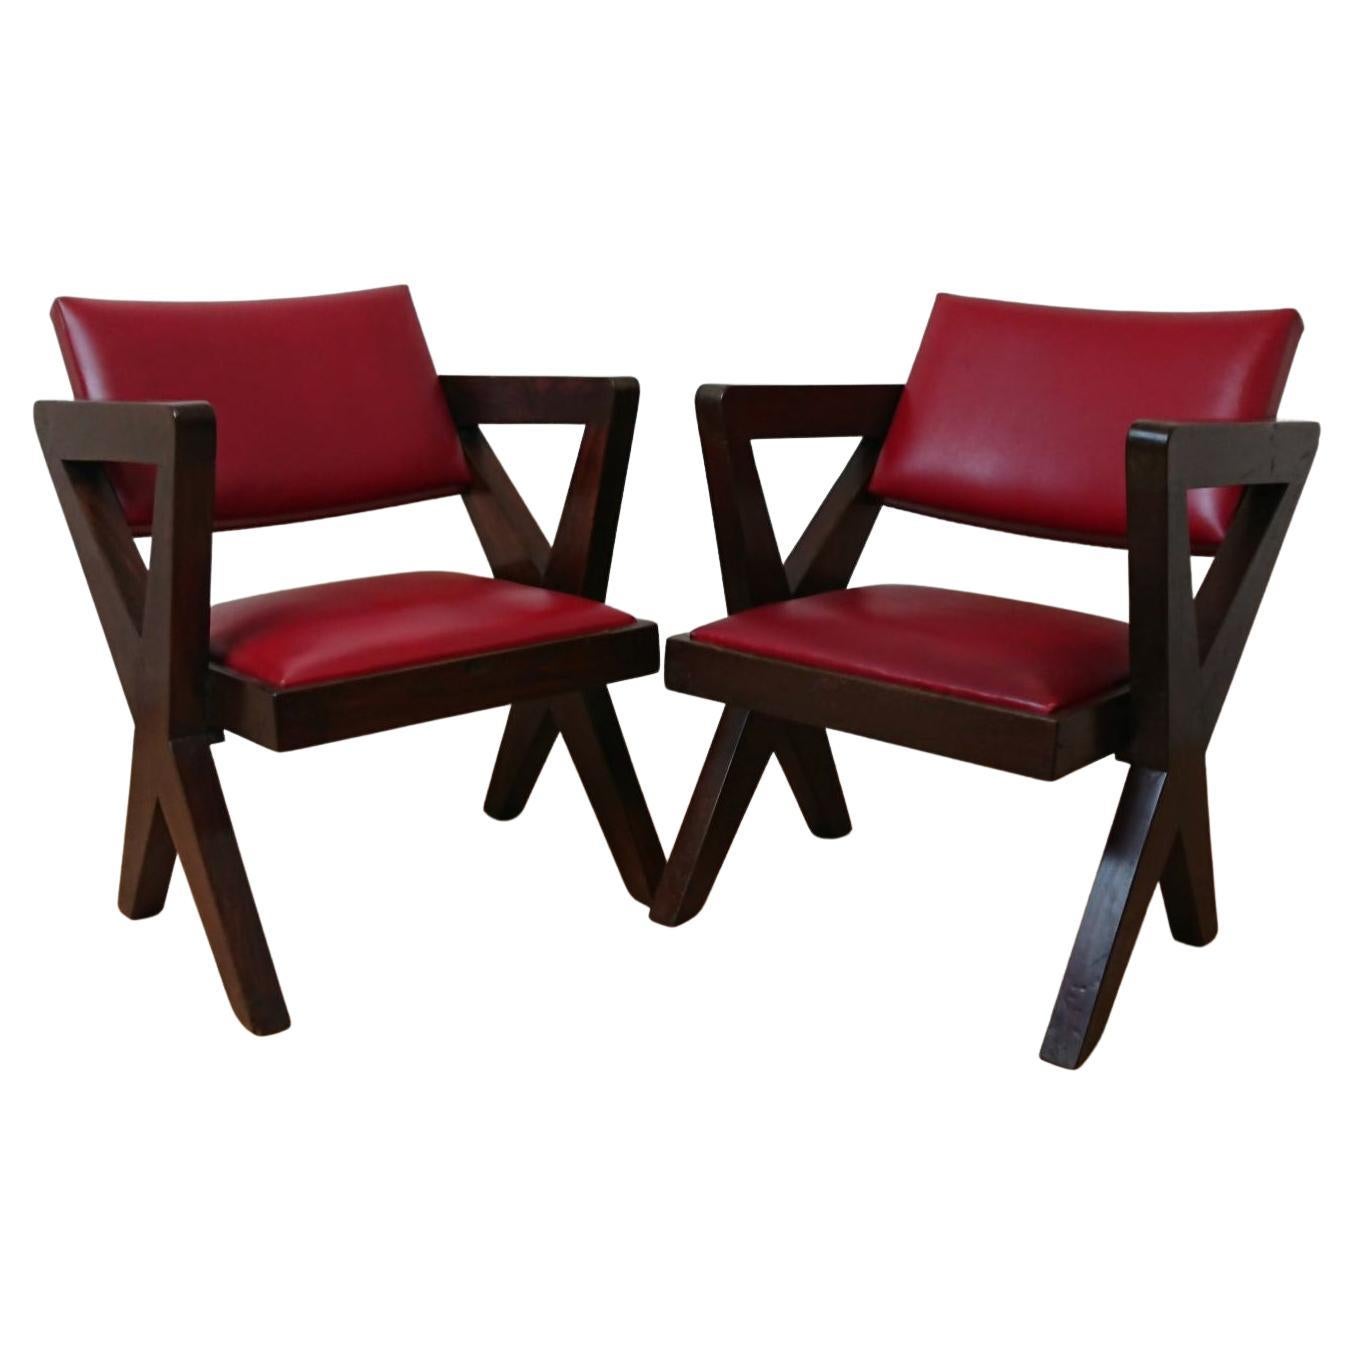 Cross Legs Pair of Armchairs Designed Pierre Jeanneret for Chandigarh